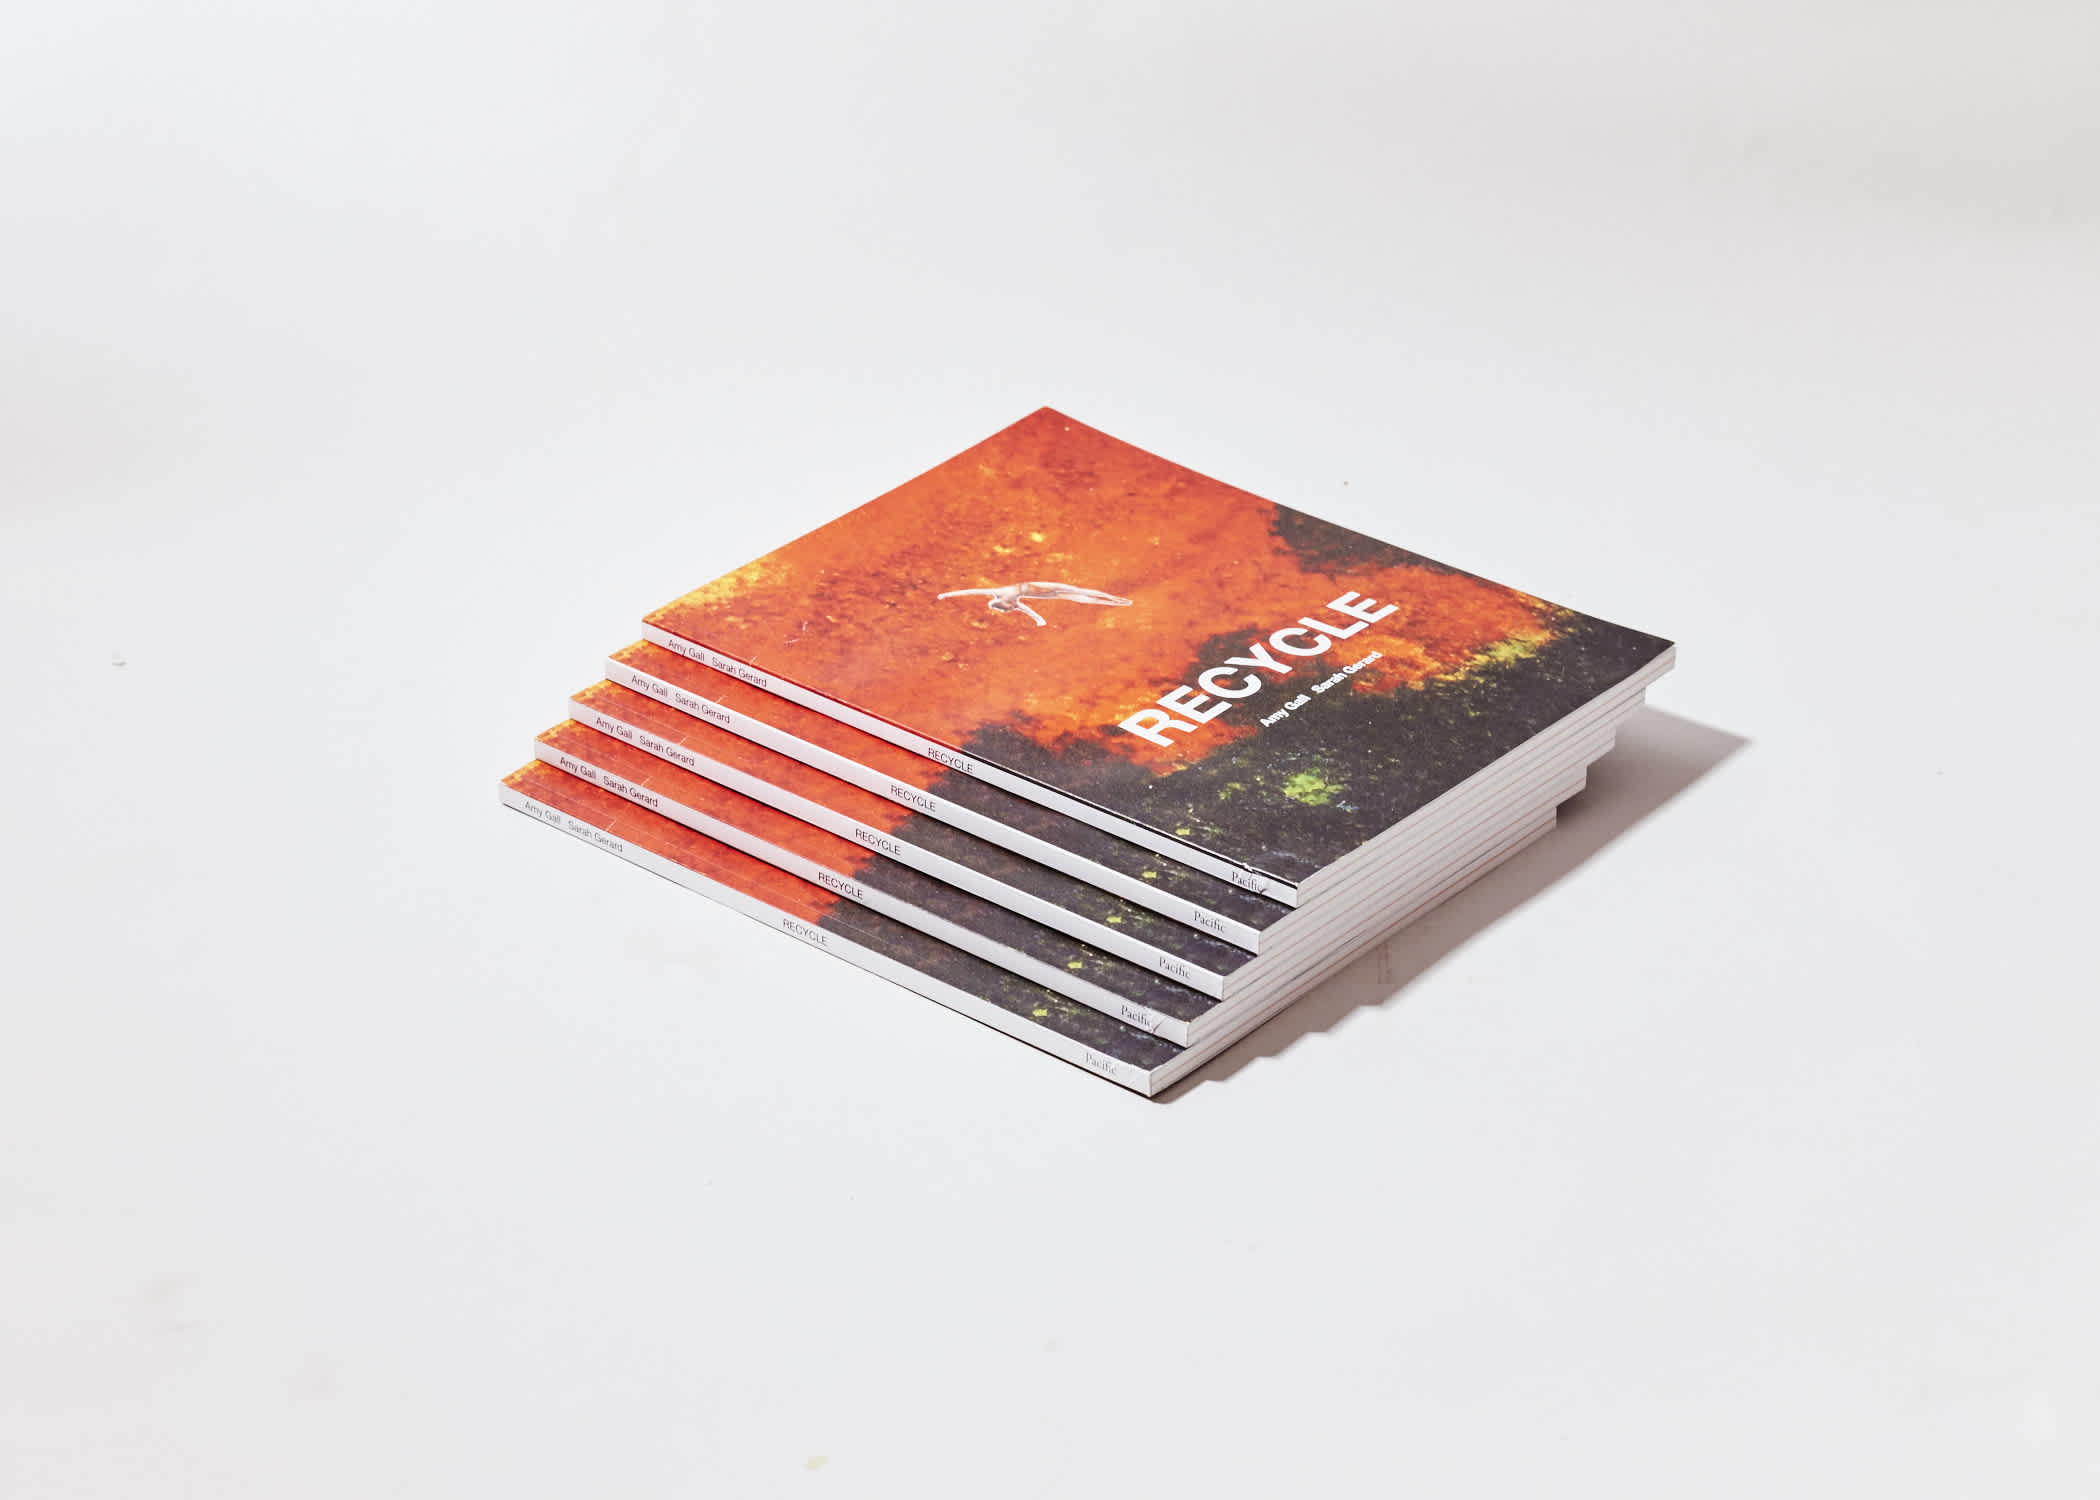 Stack of five books. The front cover is orange-red and green. The spines are visible.
